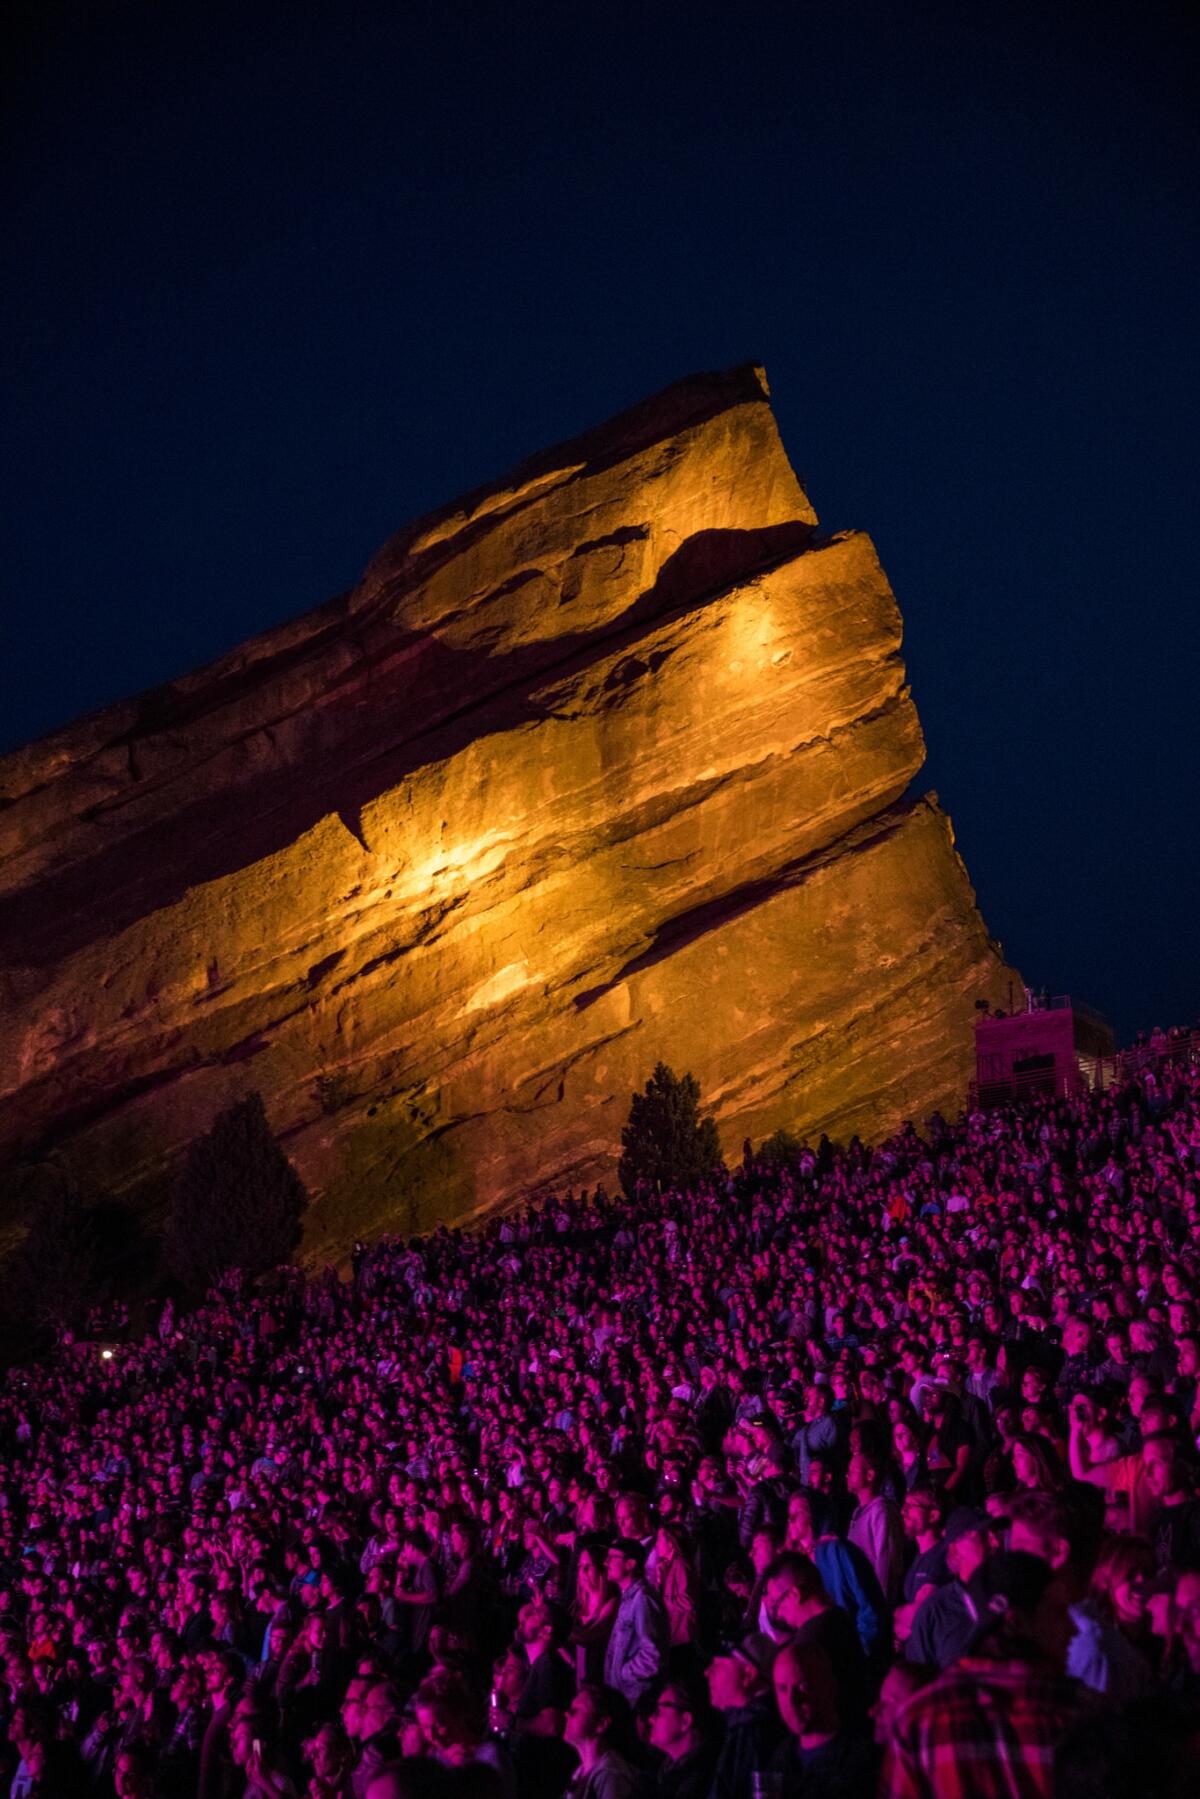 Fans listen as Phantogram/Tycho performs at the Red Rocks Amphitheatre.